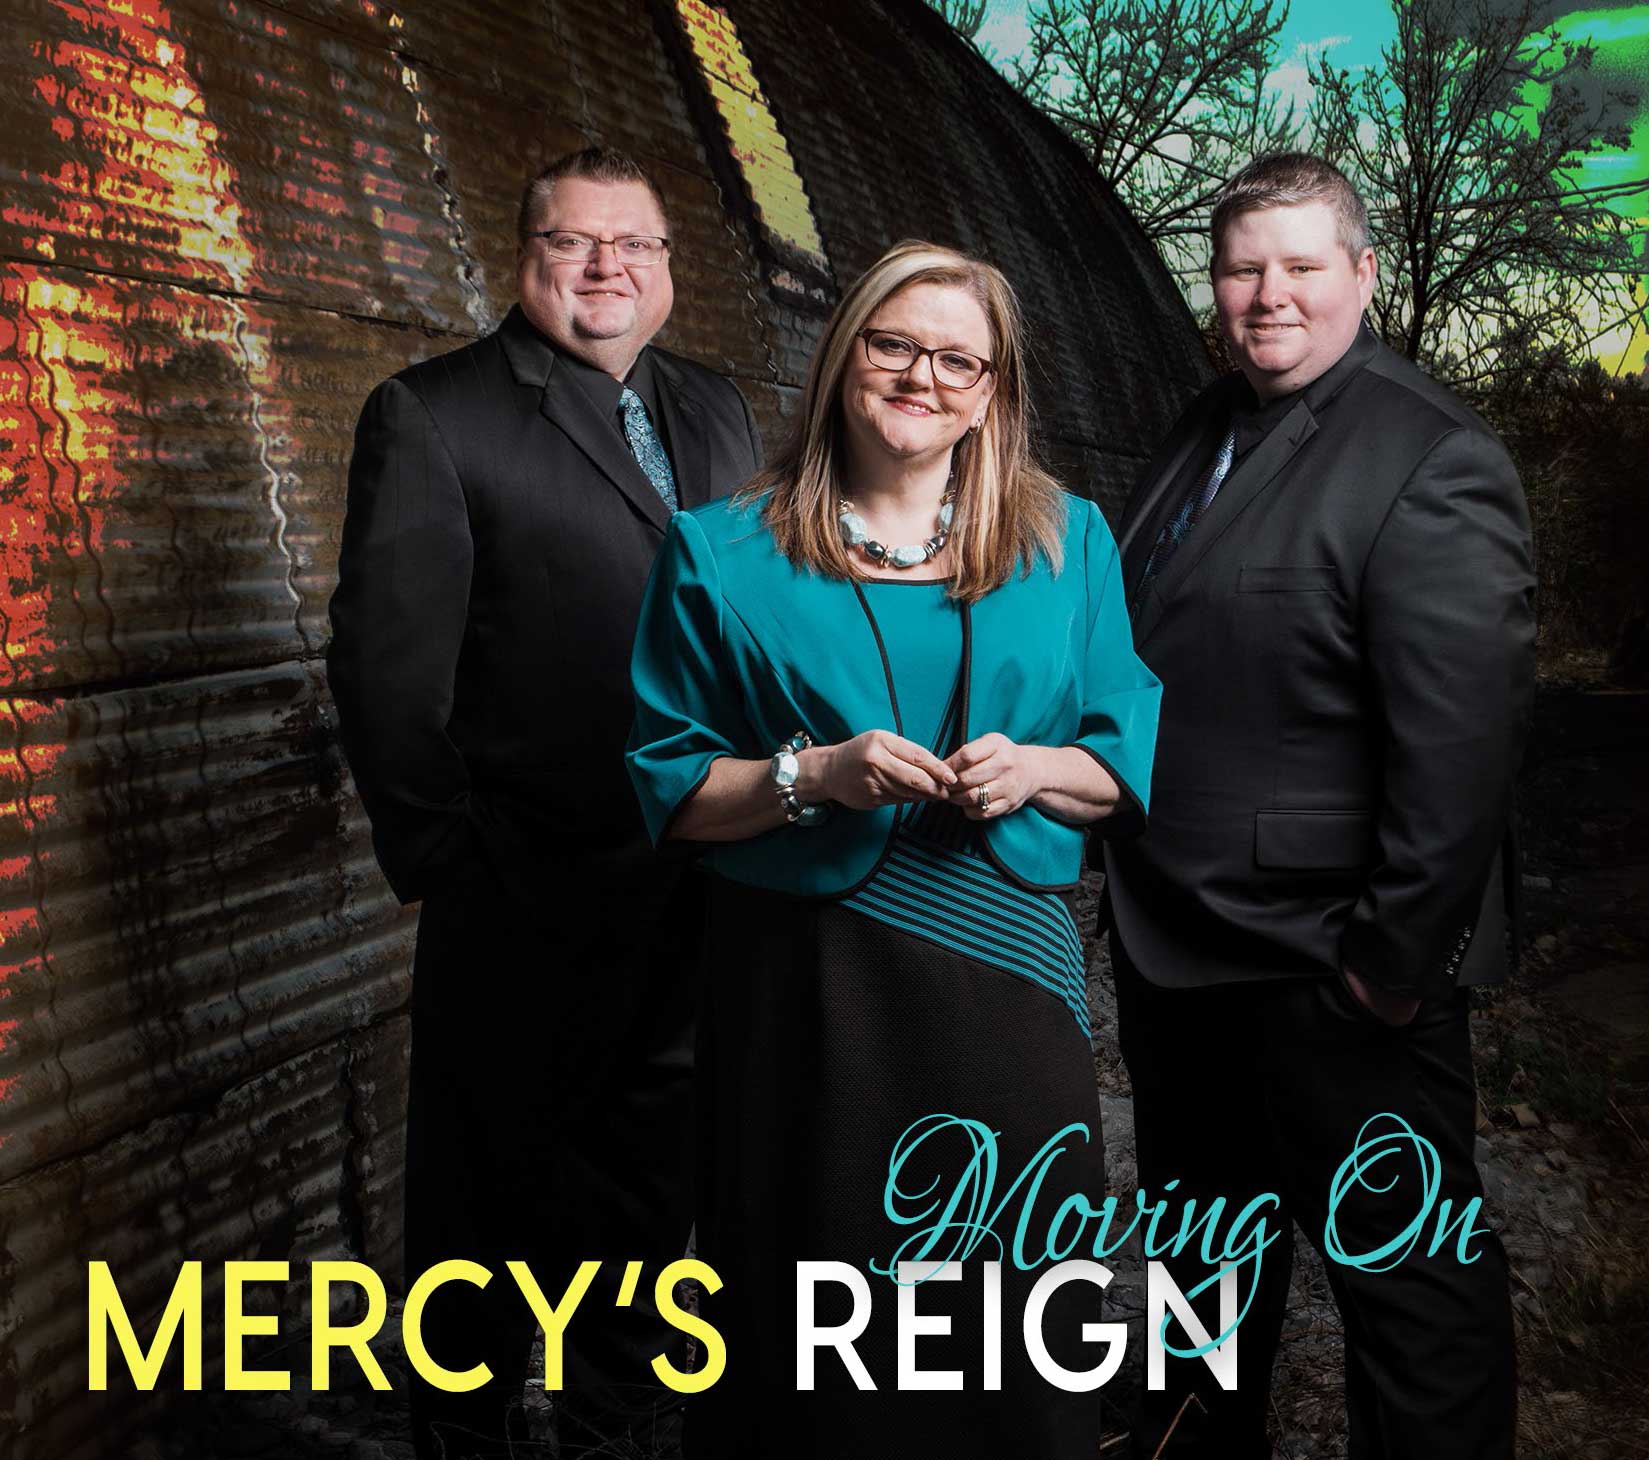 Songs Garden Music Group Welcomes Mercy's Reign to "The Garden"!